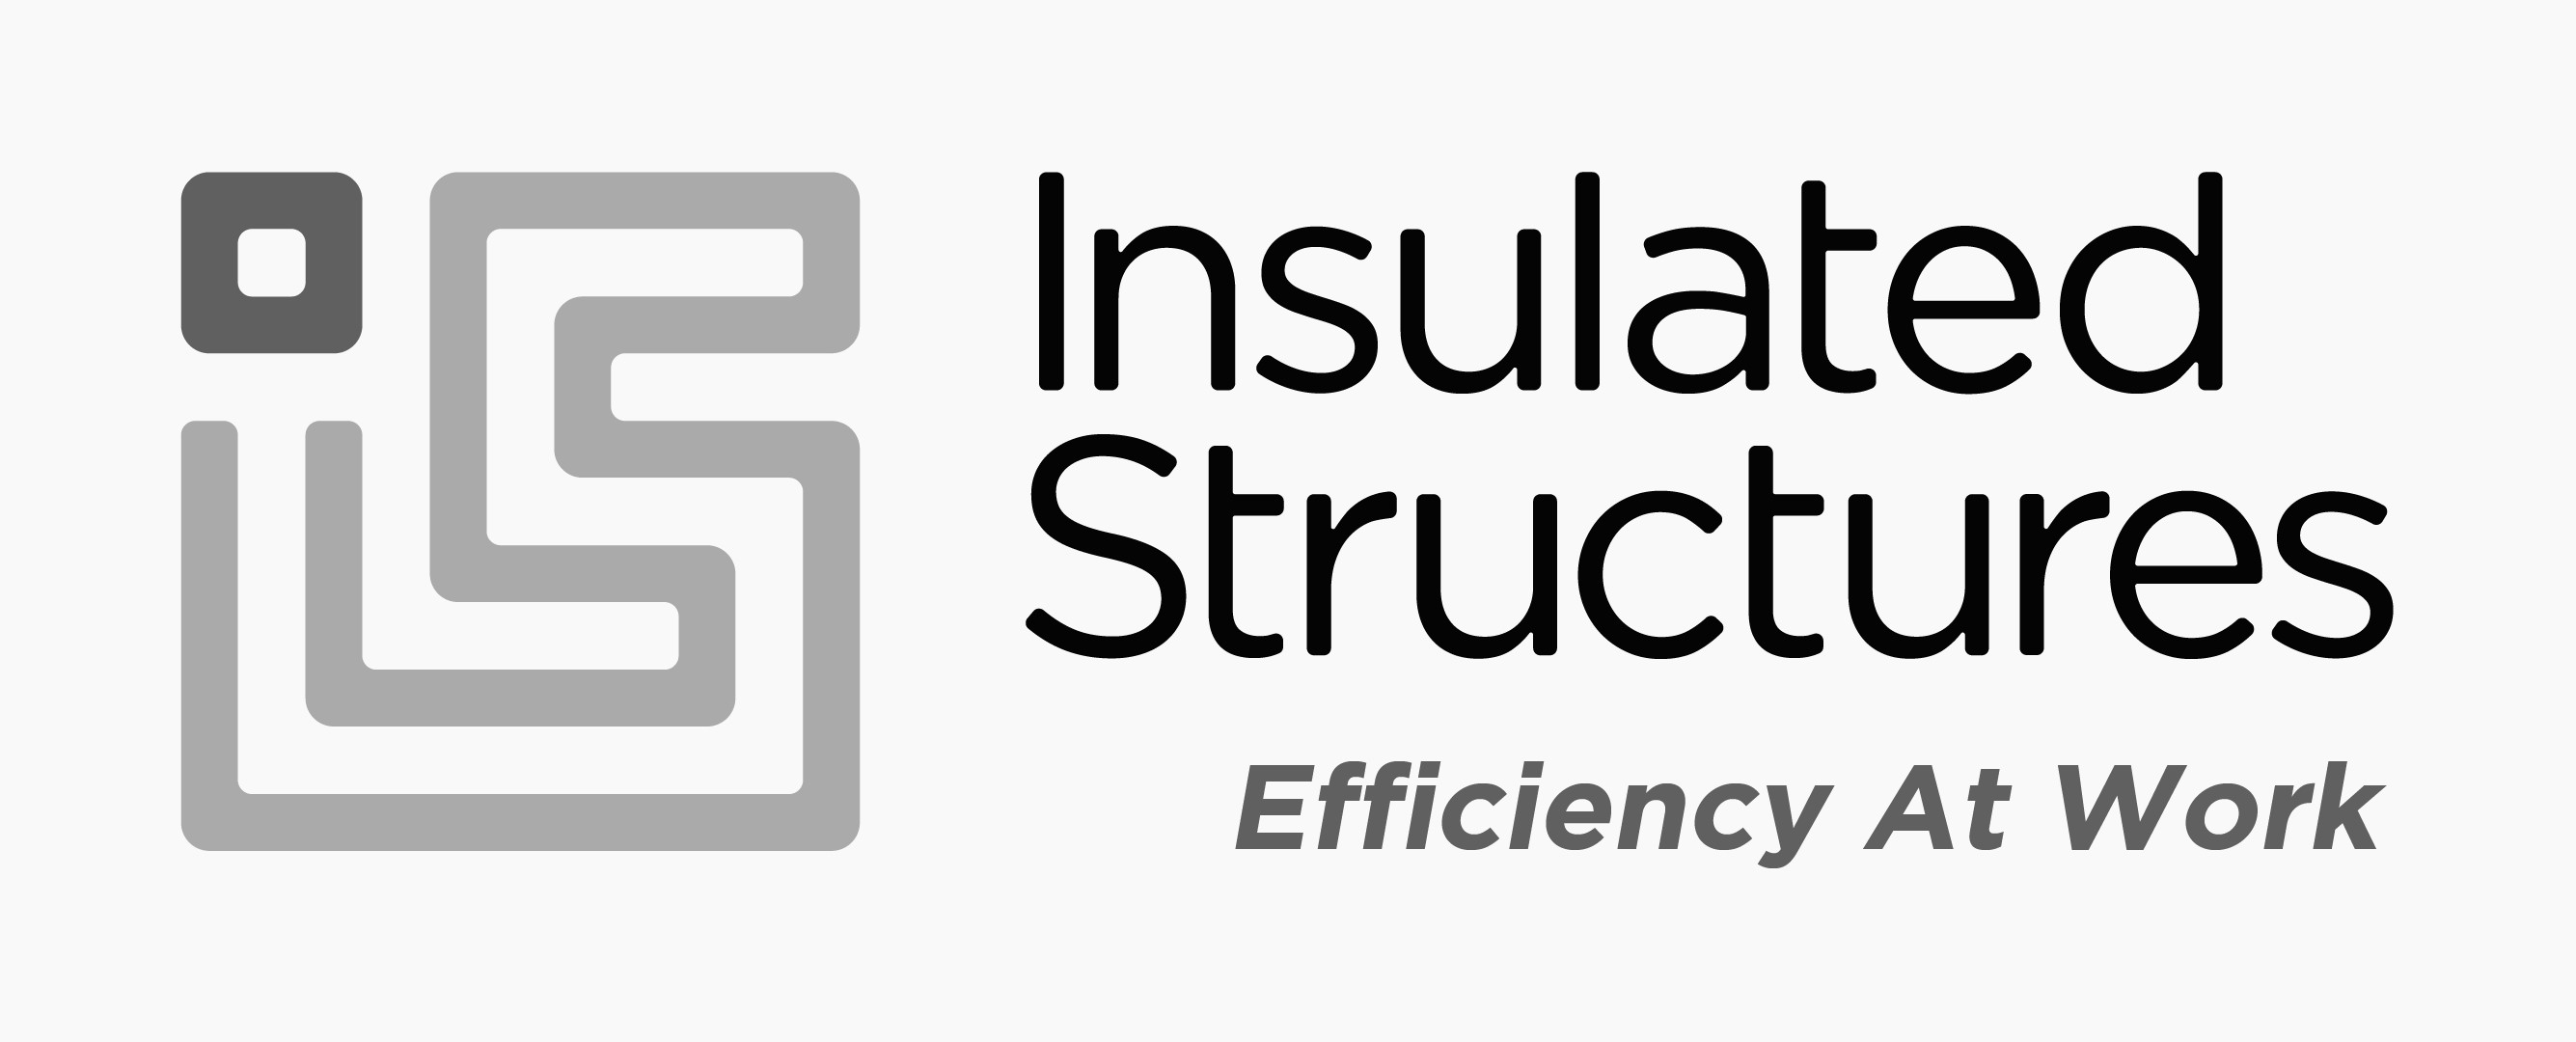 Inslated Structured Footer Logo